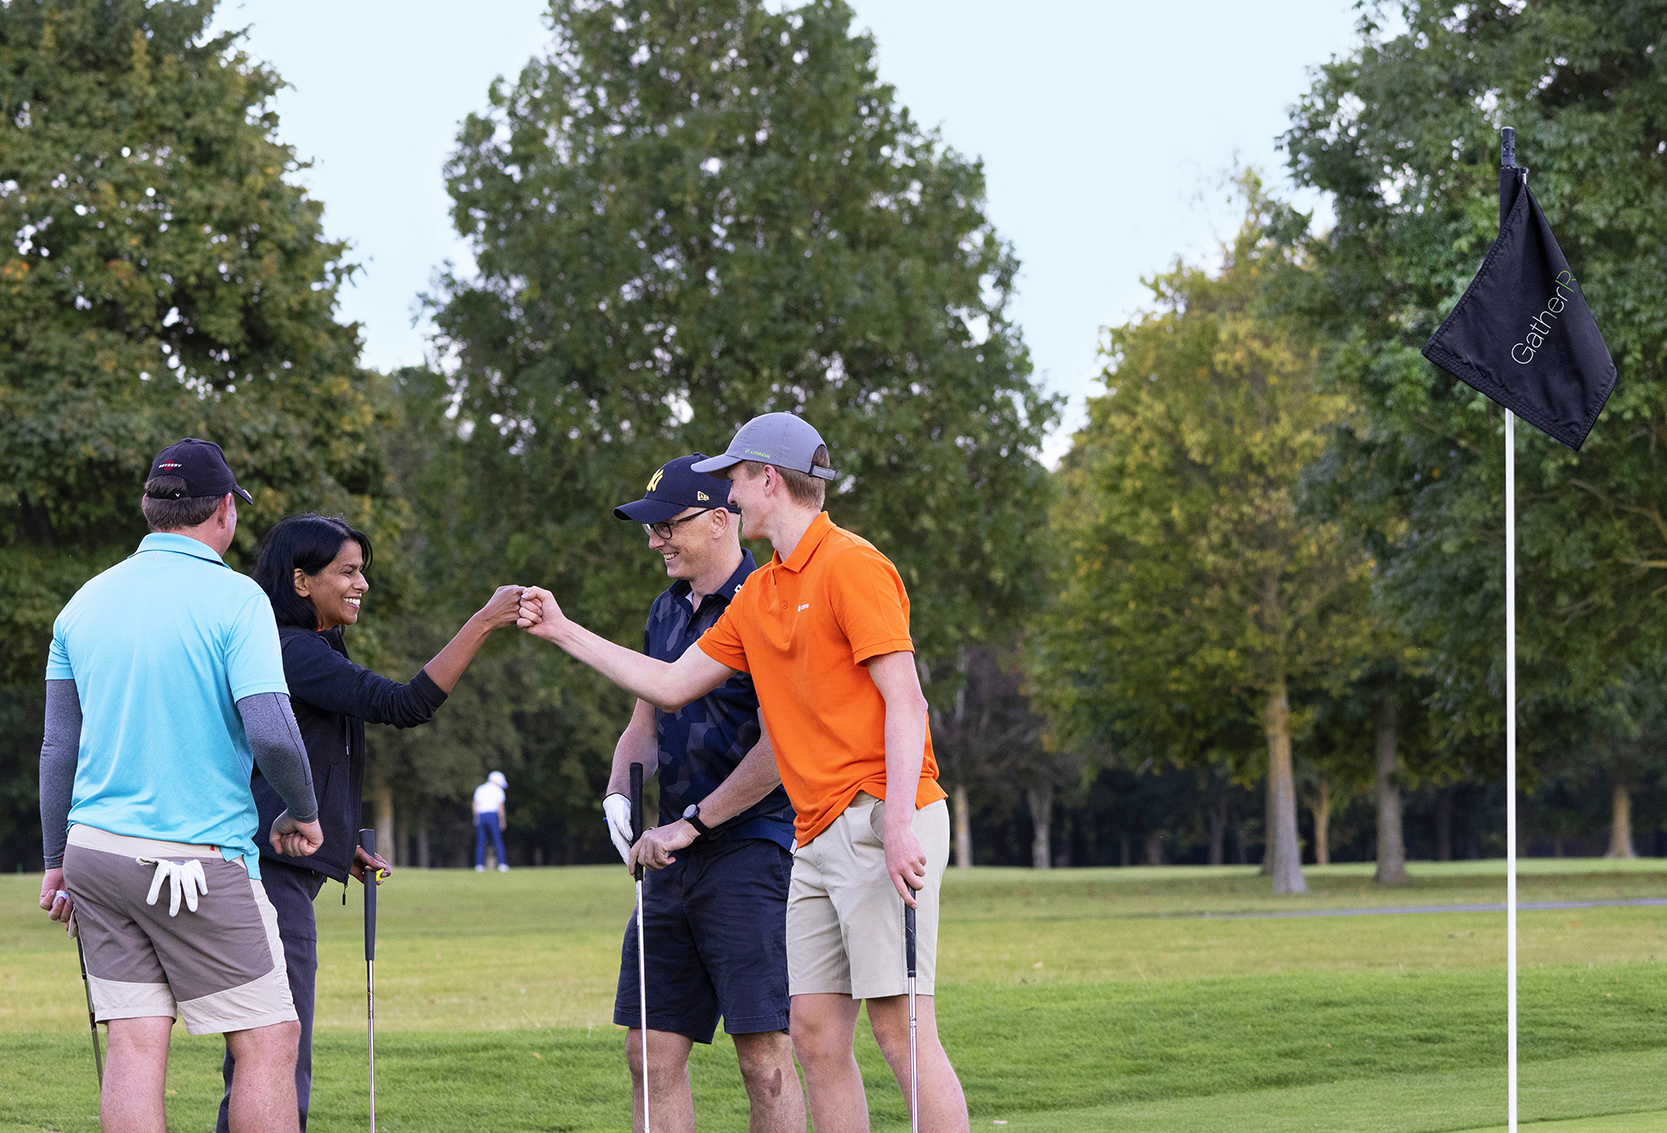 Four people doing a fist pump on golf course